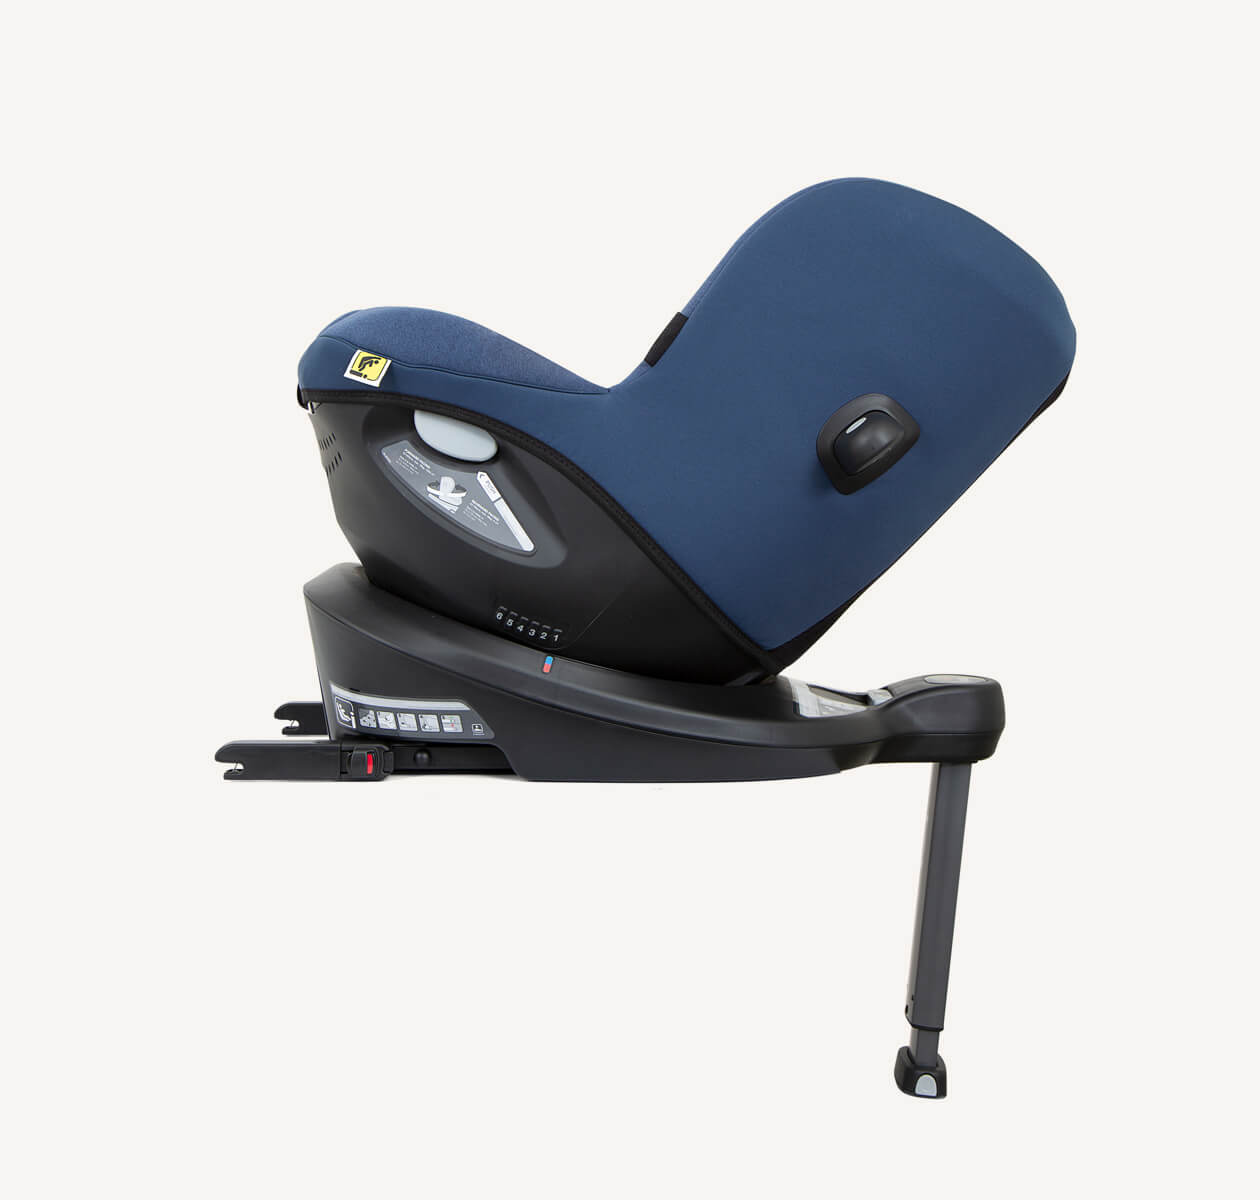 Joie i-Spin 360 R